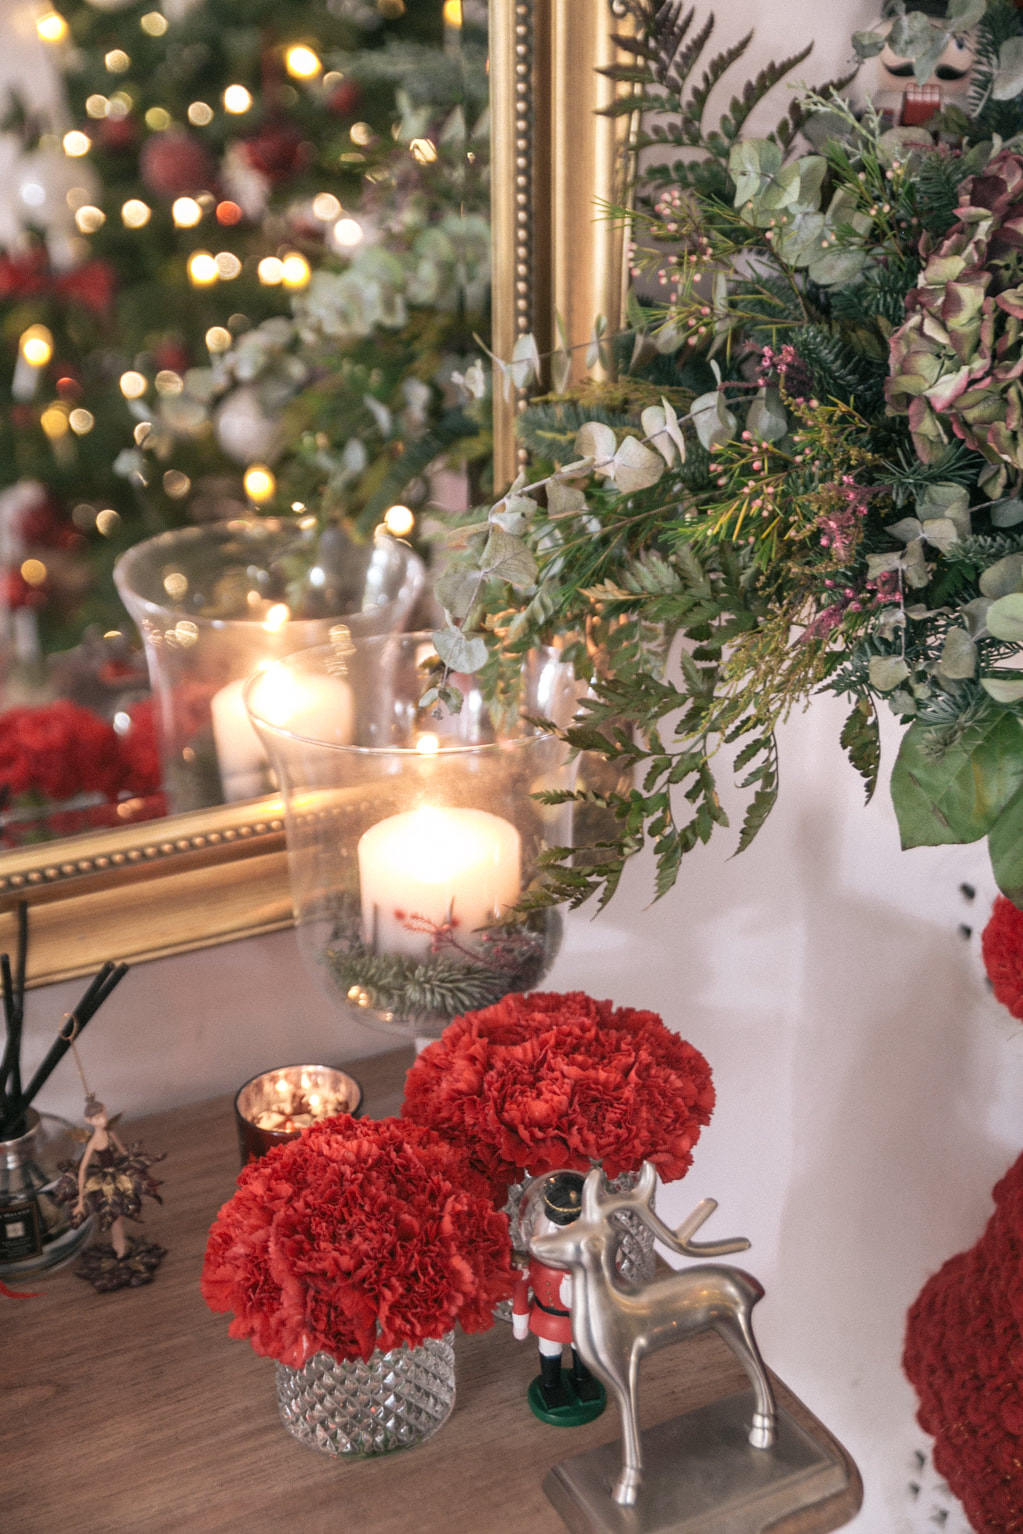 Red and White Christmas hallway decorations by The Belle Blog 